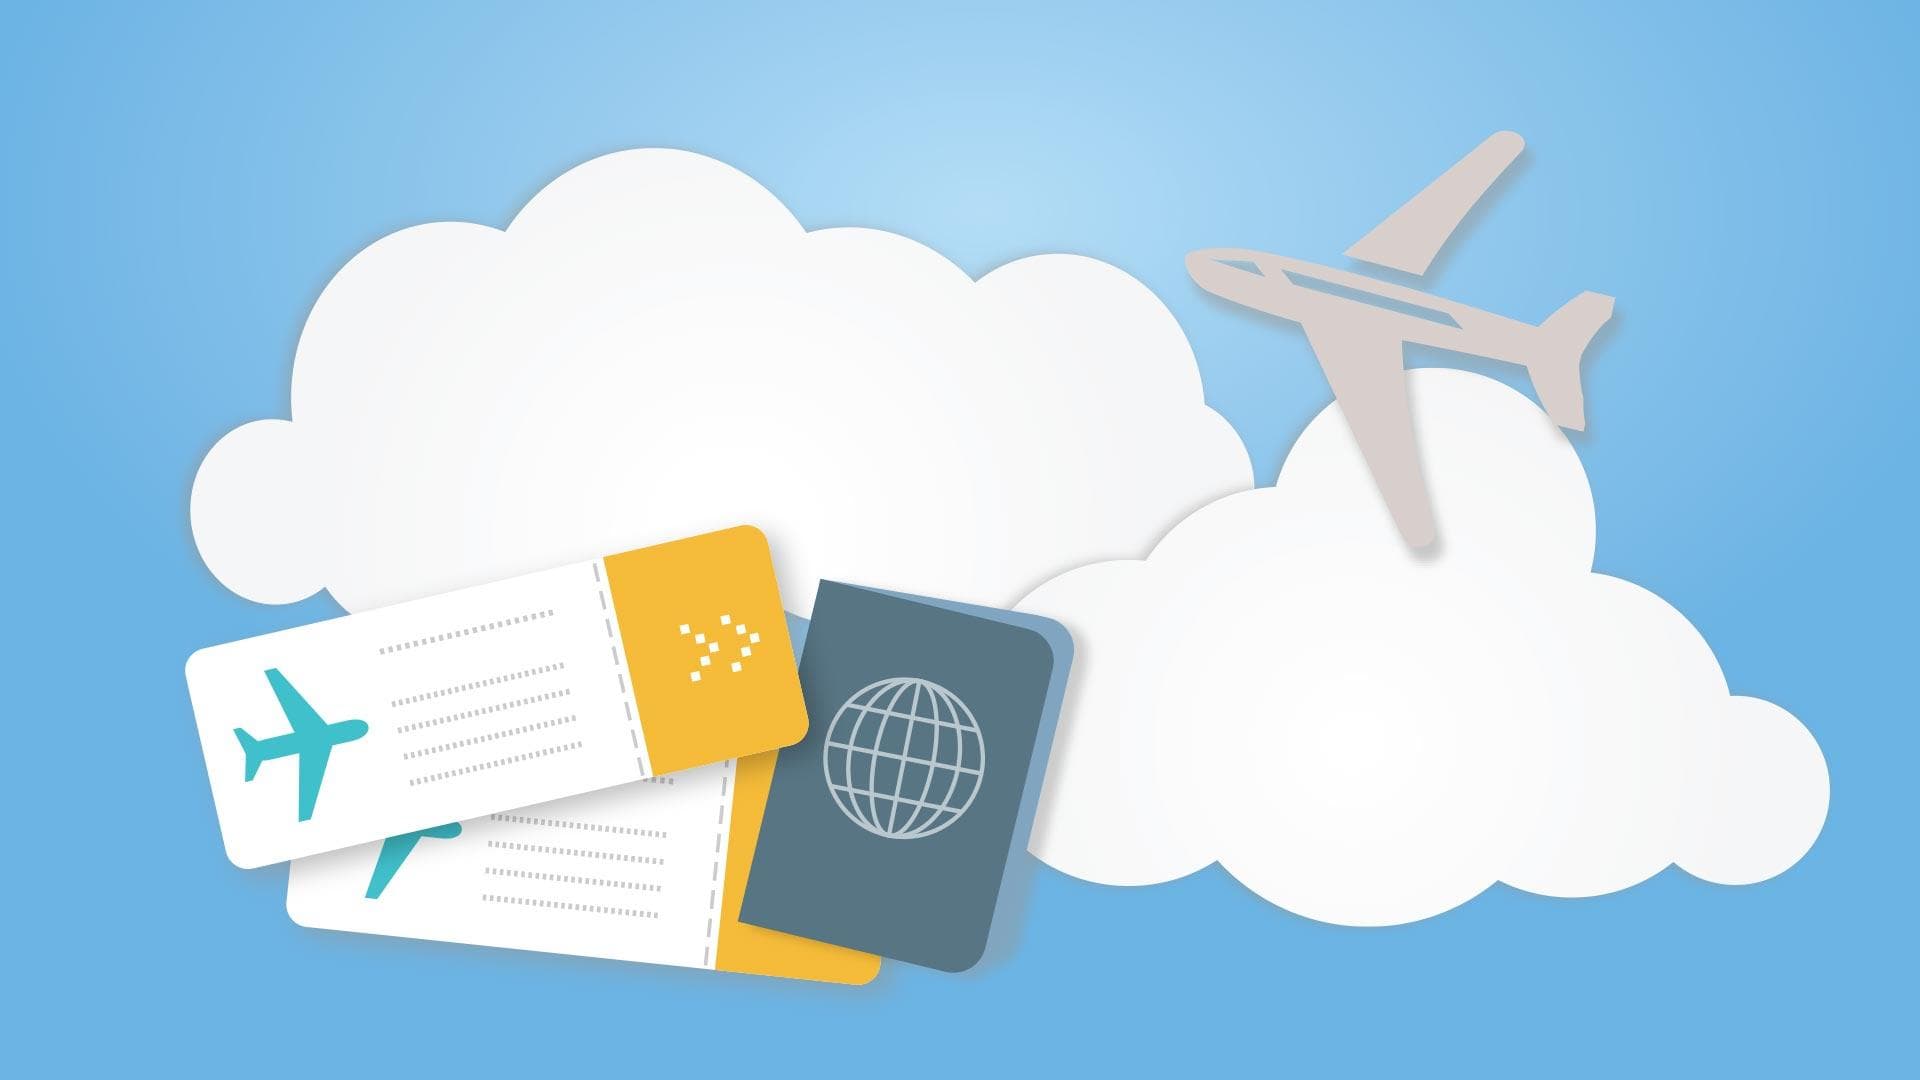 Clouds, plane, tickets and passport